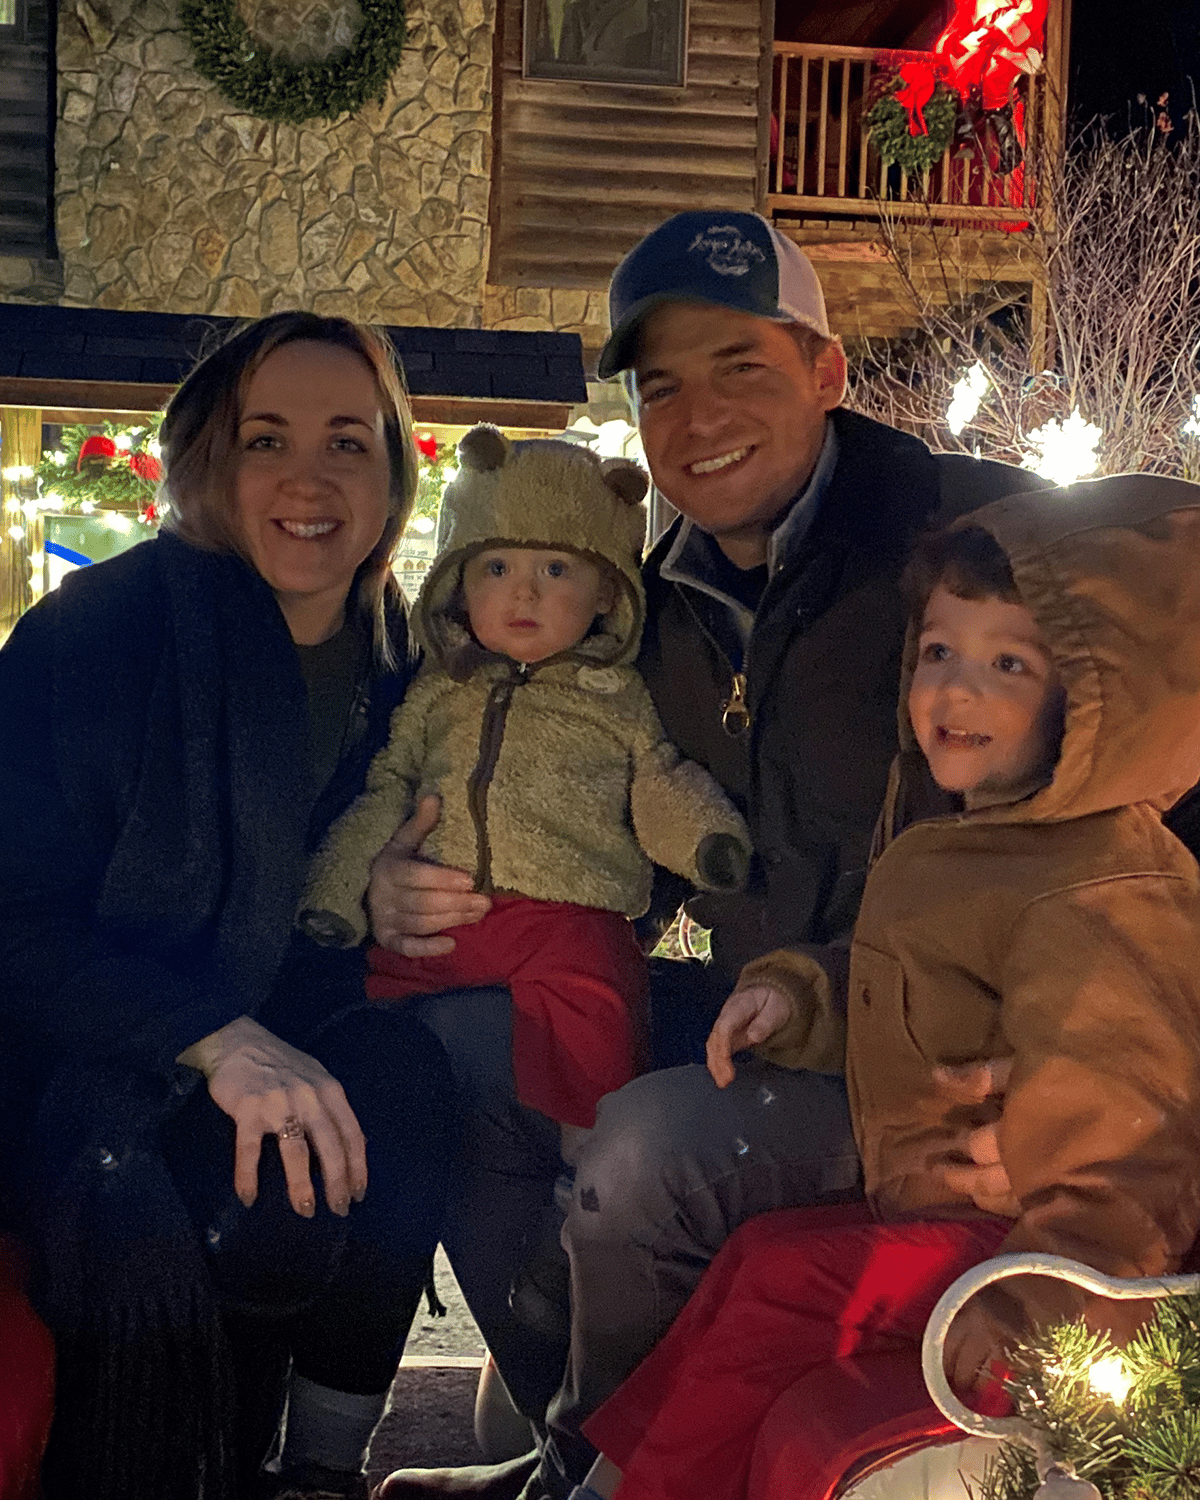 Winter Carriage Rides